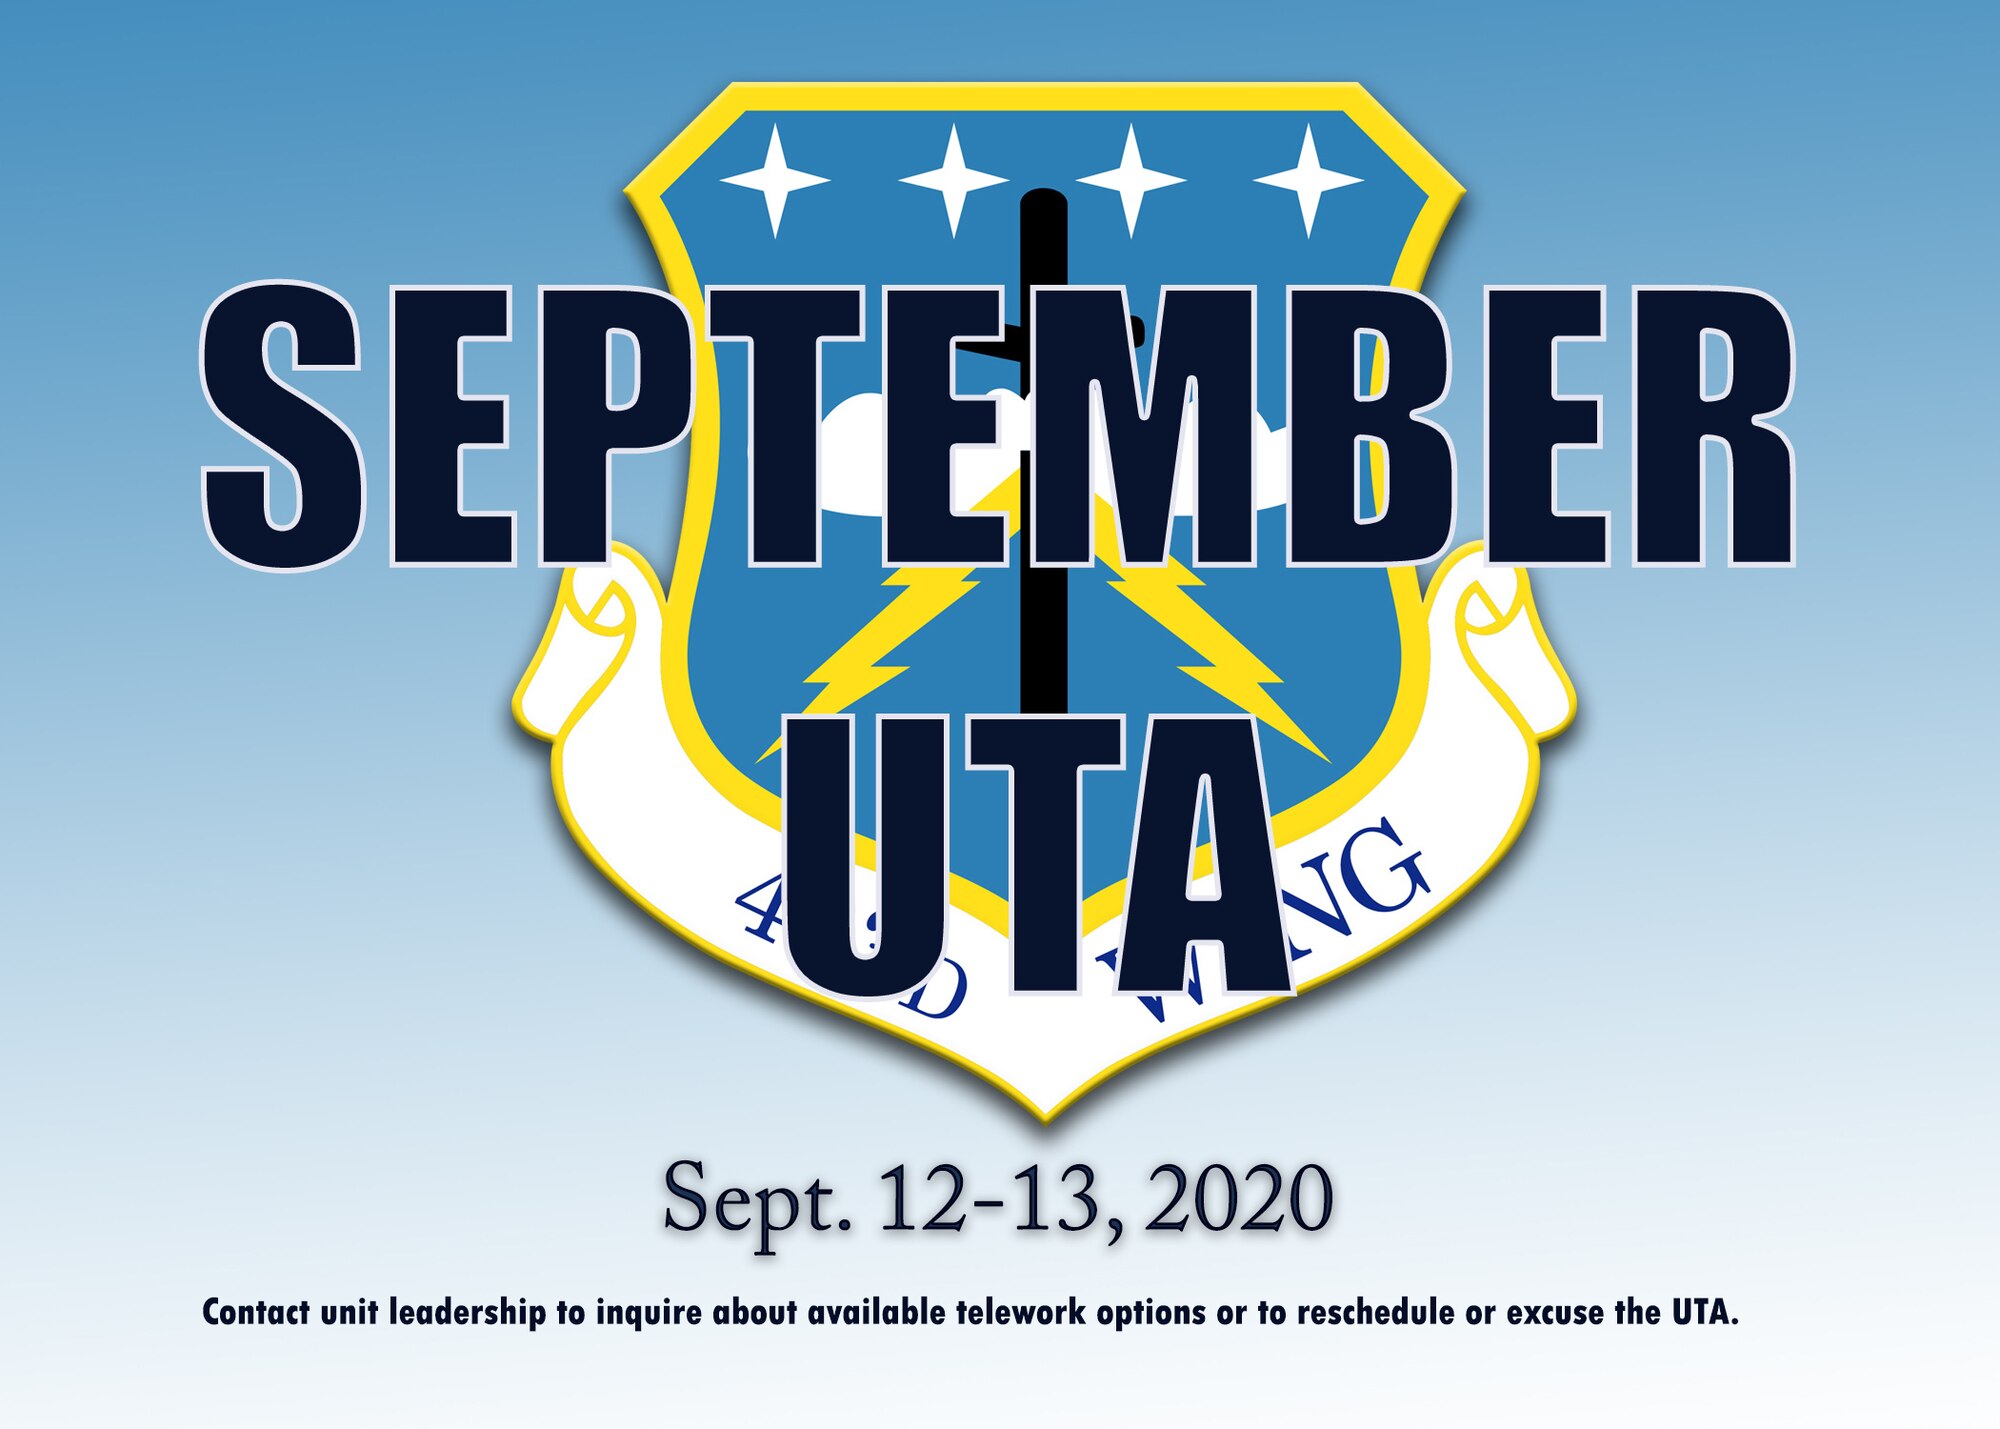 The 403rd Wing, Keesler Air Force Base, Mississippi, will have a Unit Training Assembly Sept. 12-13, 2020. The UTA is mandatory for mission essential Airmen and optional for others based on commanders’ discretion. (U.S. Air Force graphic by Lt. Col. Marnee A.C. Losurdo)